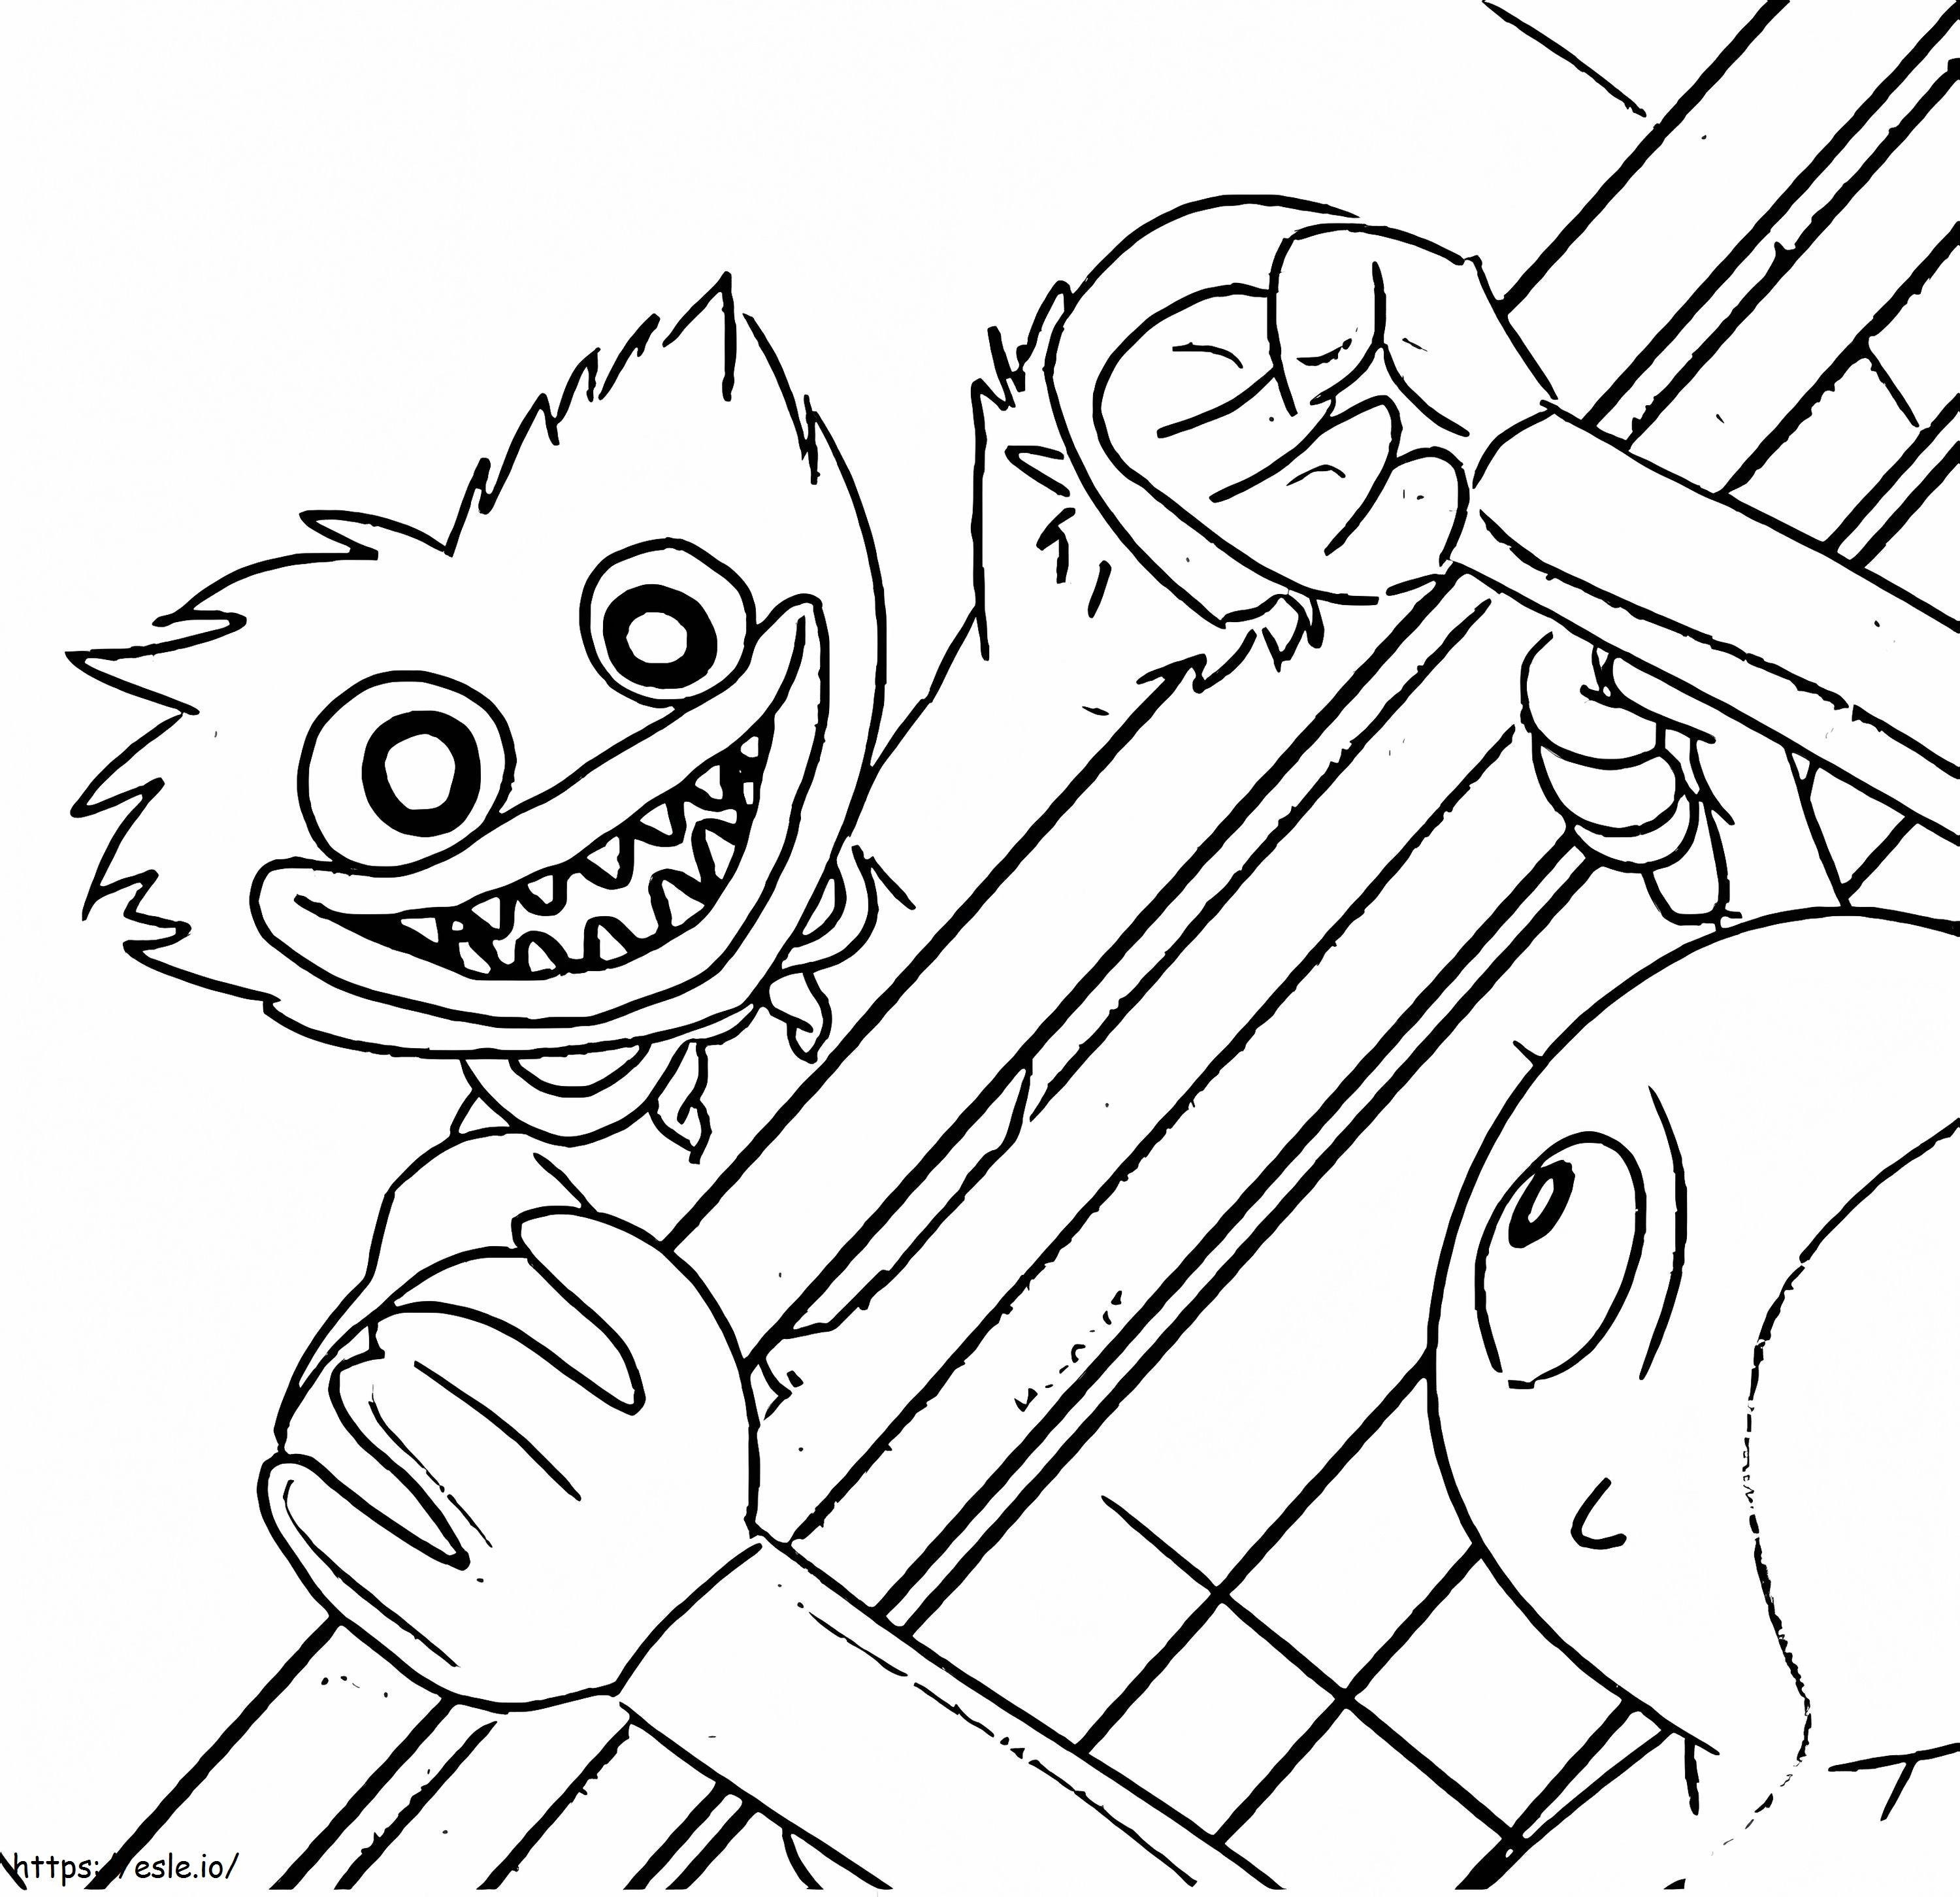 Huggy Wuggy para Colorir  Huggy Wuggy Coloring Page 